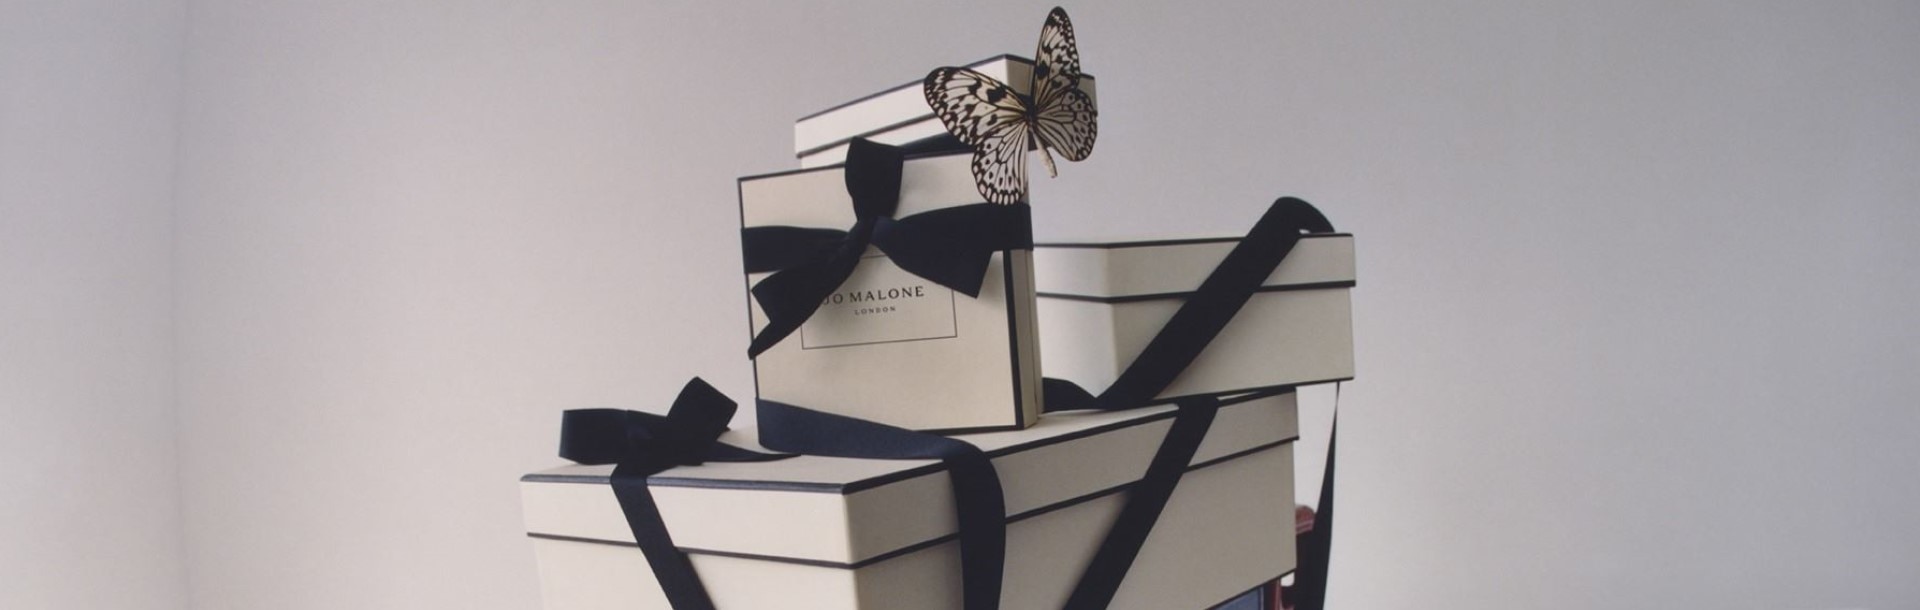 Jo Malone London's iconic black & cream gift boxes, beautifully tied with black ribbon on top of a blue toy truck